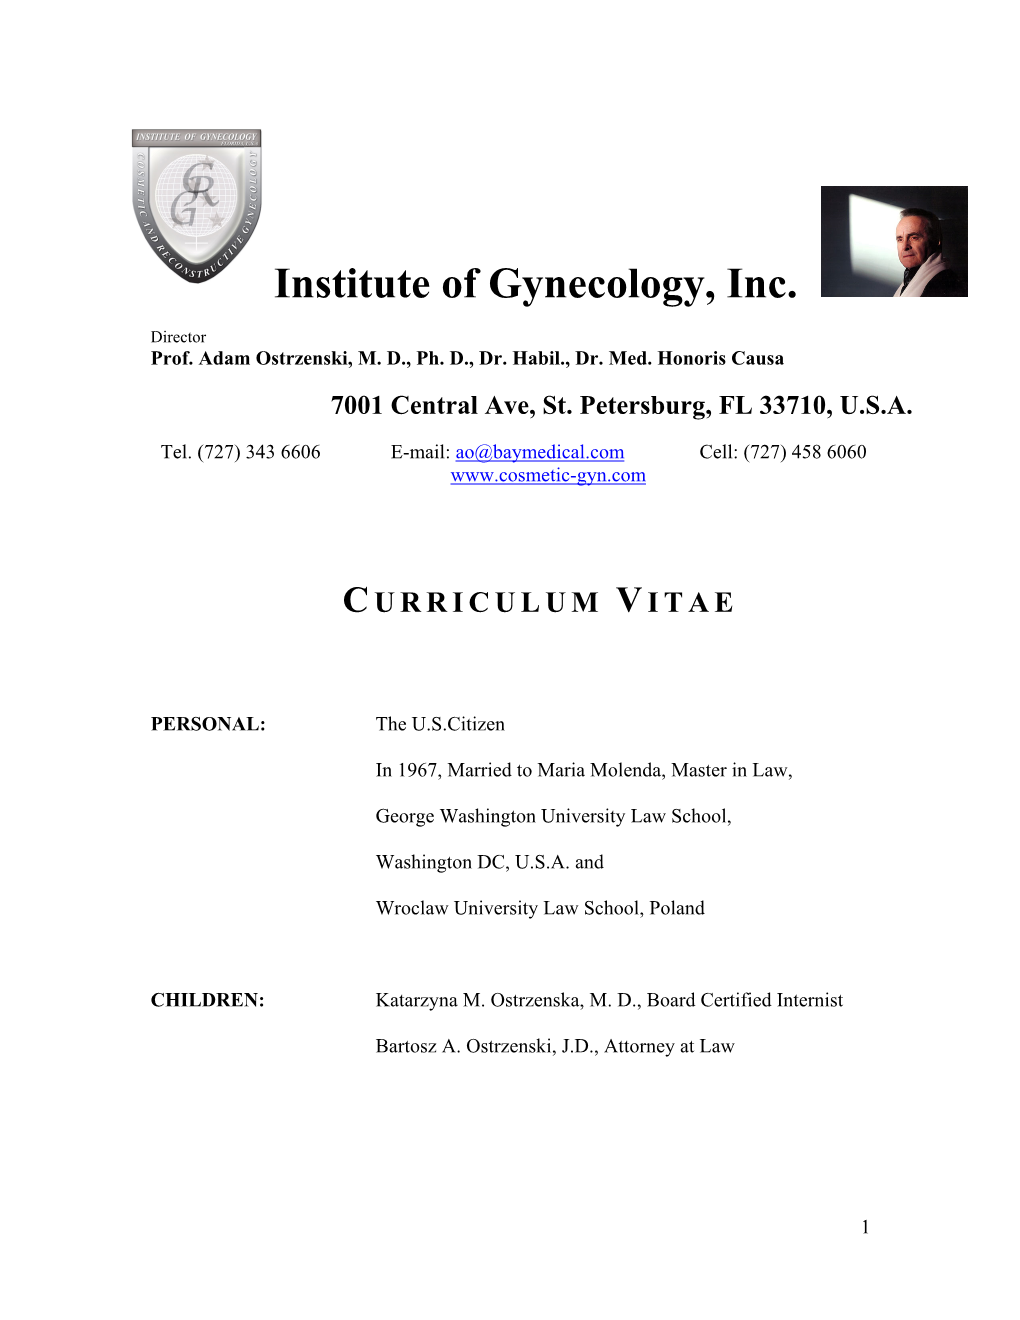 Institute of Gynecology, Inc